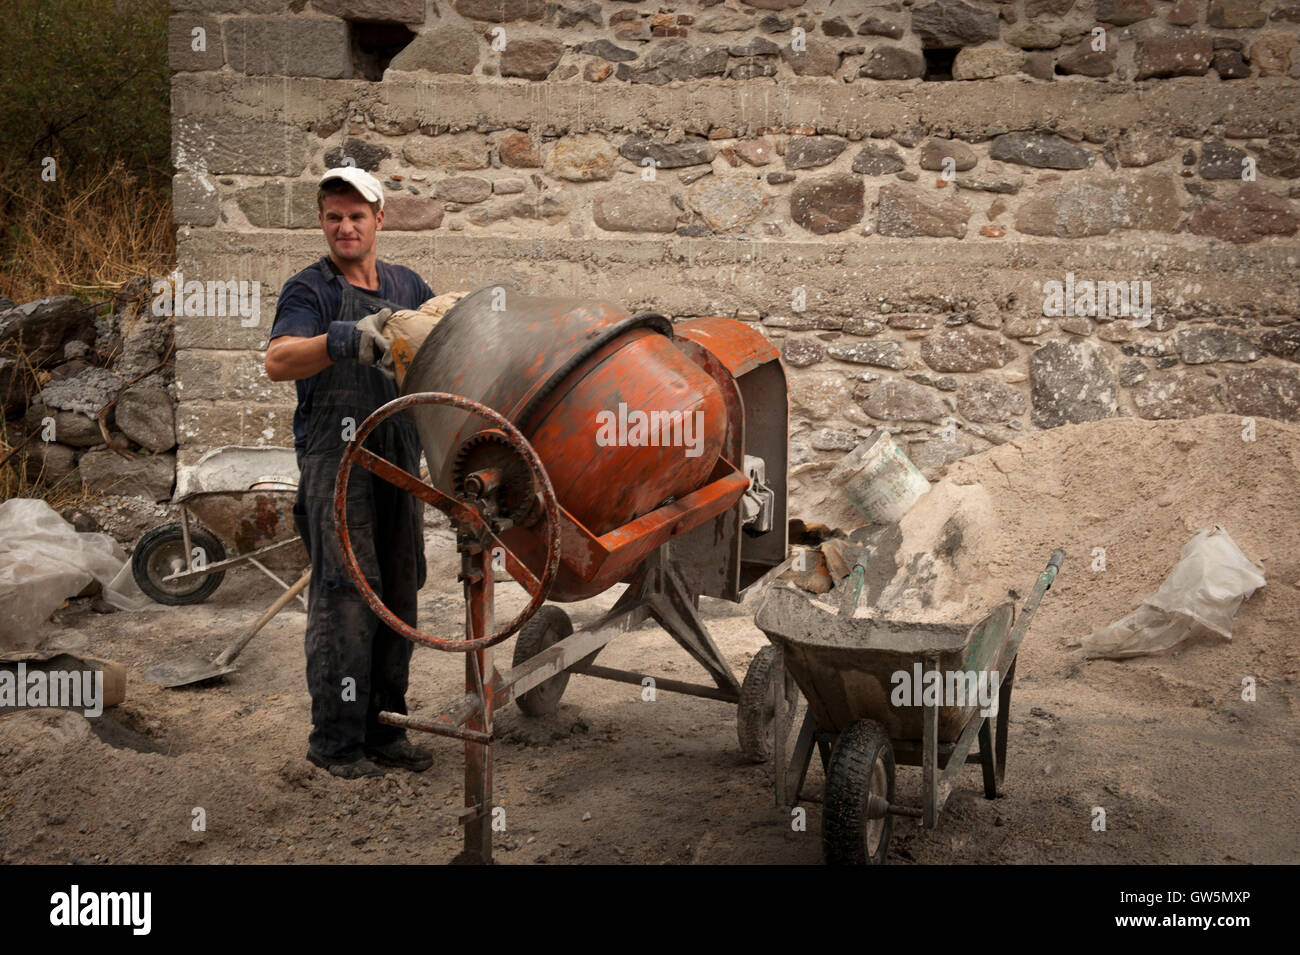 Albanian worker mixes cement for a construction job repairing a wall in Greece Stock Photo